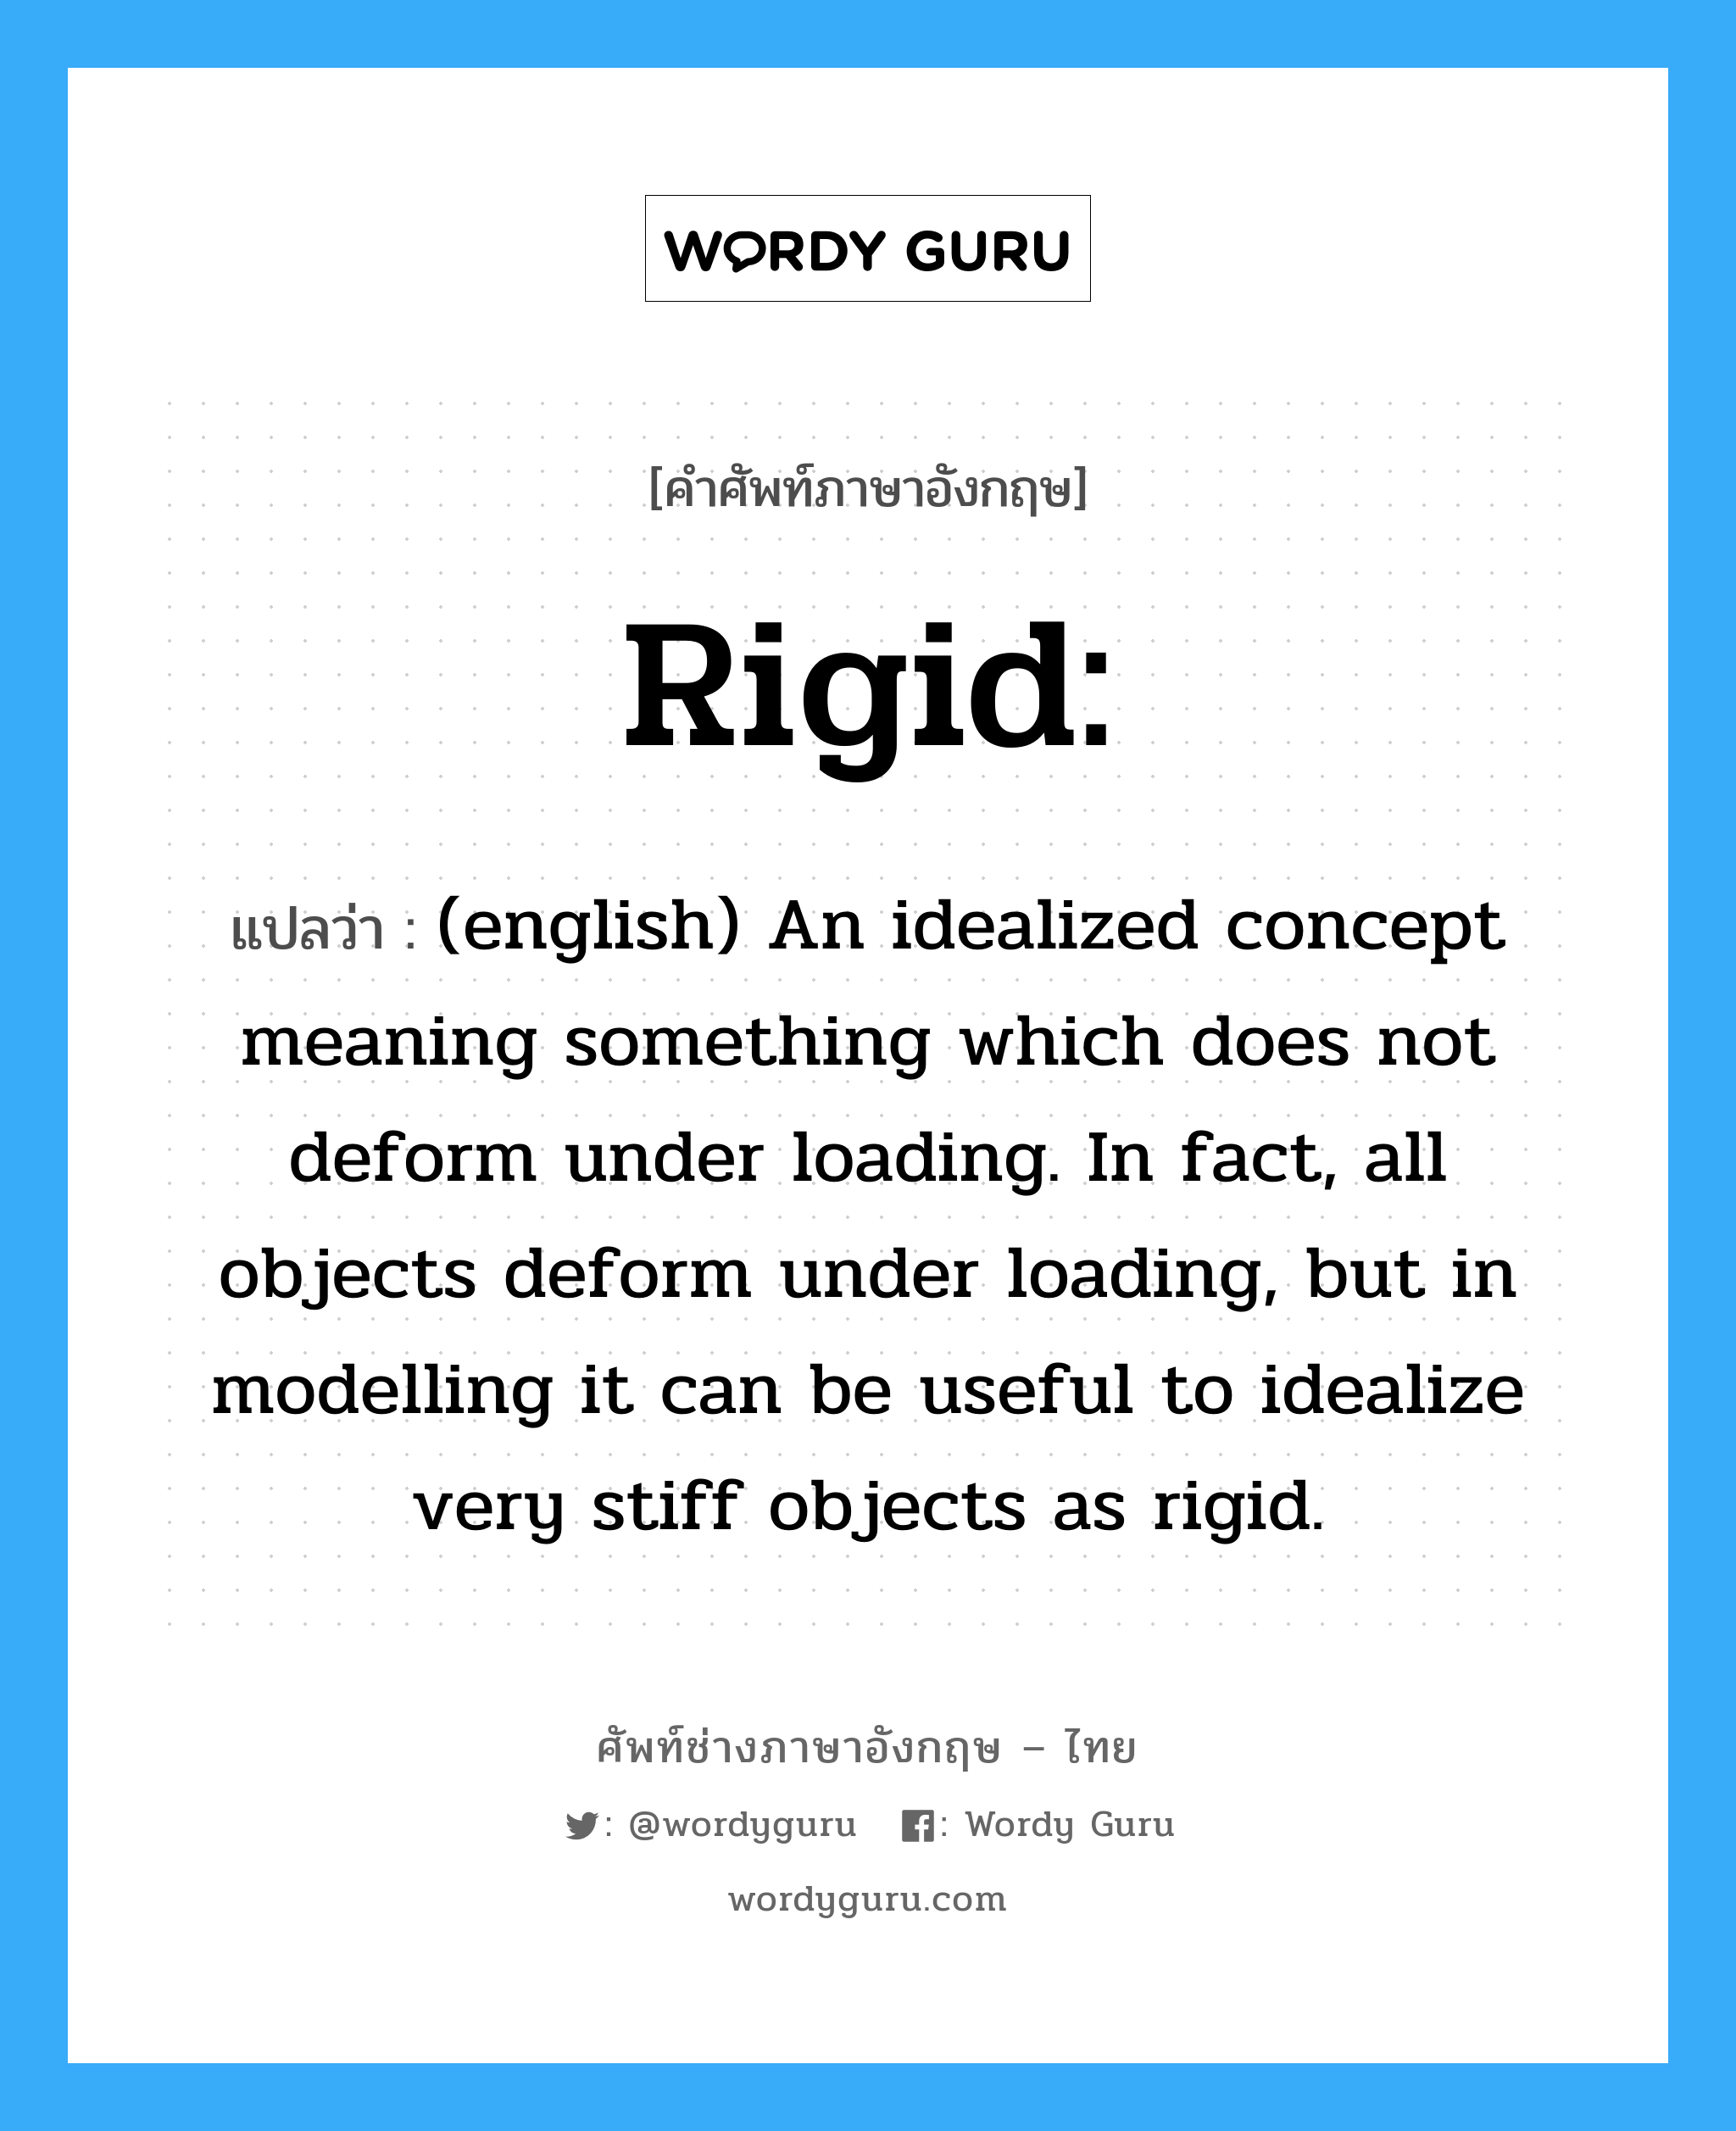 Rigid: แปลว่า?, คำศัพท์ช่างภาษาอังกฤษ - ไทย Rigid: คำศัพท์ภาษาอังกฤษ Rigid: แปลว่า (english) An idealized concept meaning something which does not deform under loading. In fact, all objects deform under loading, but in modelling it can be useful to idealize very stiff objects as rigid.